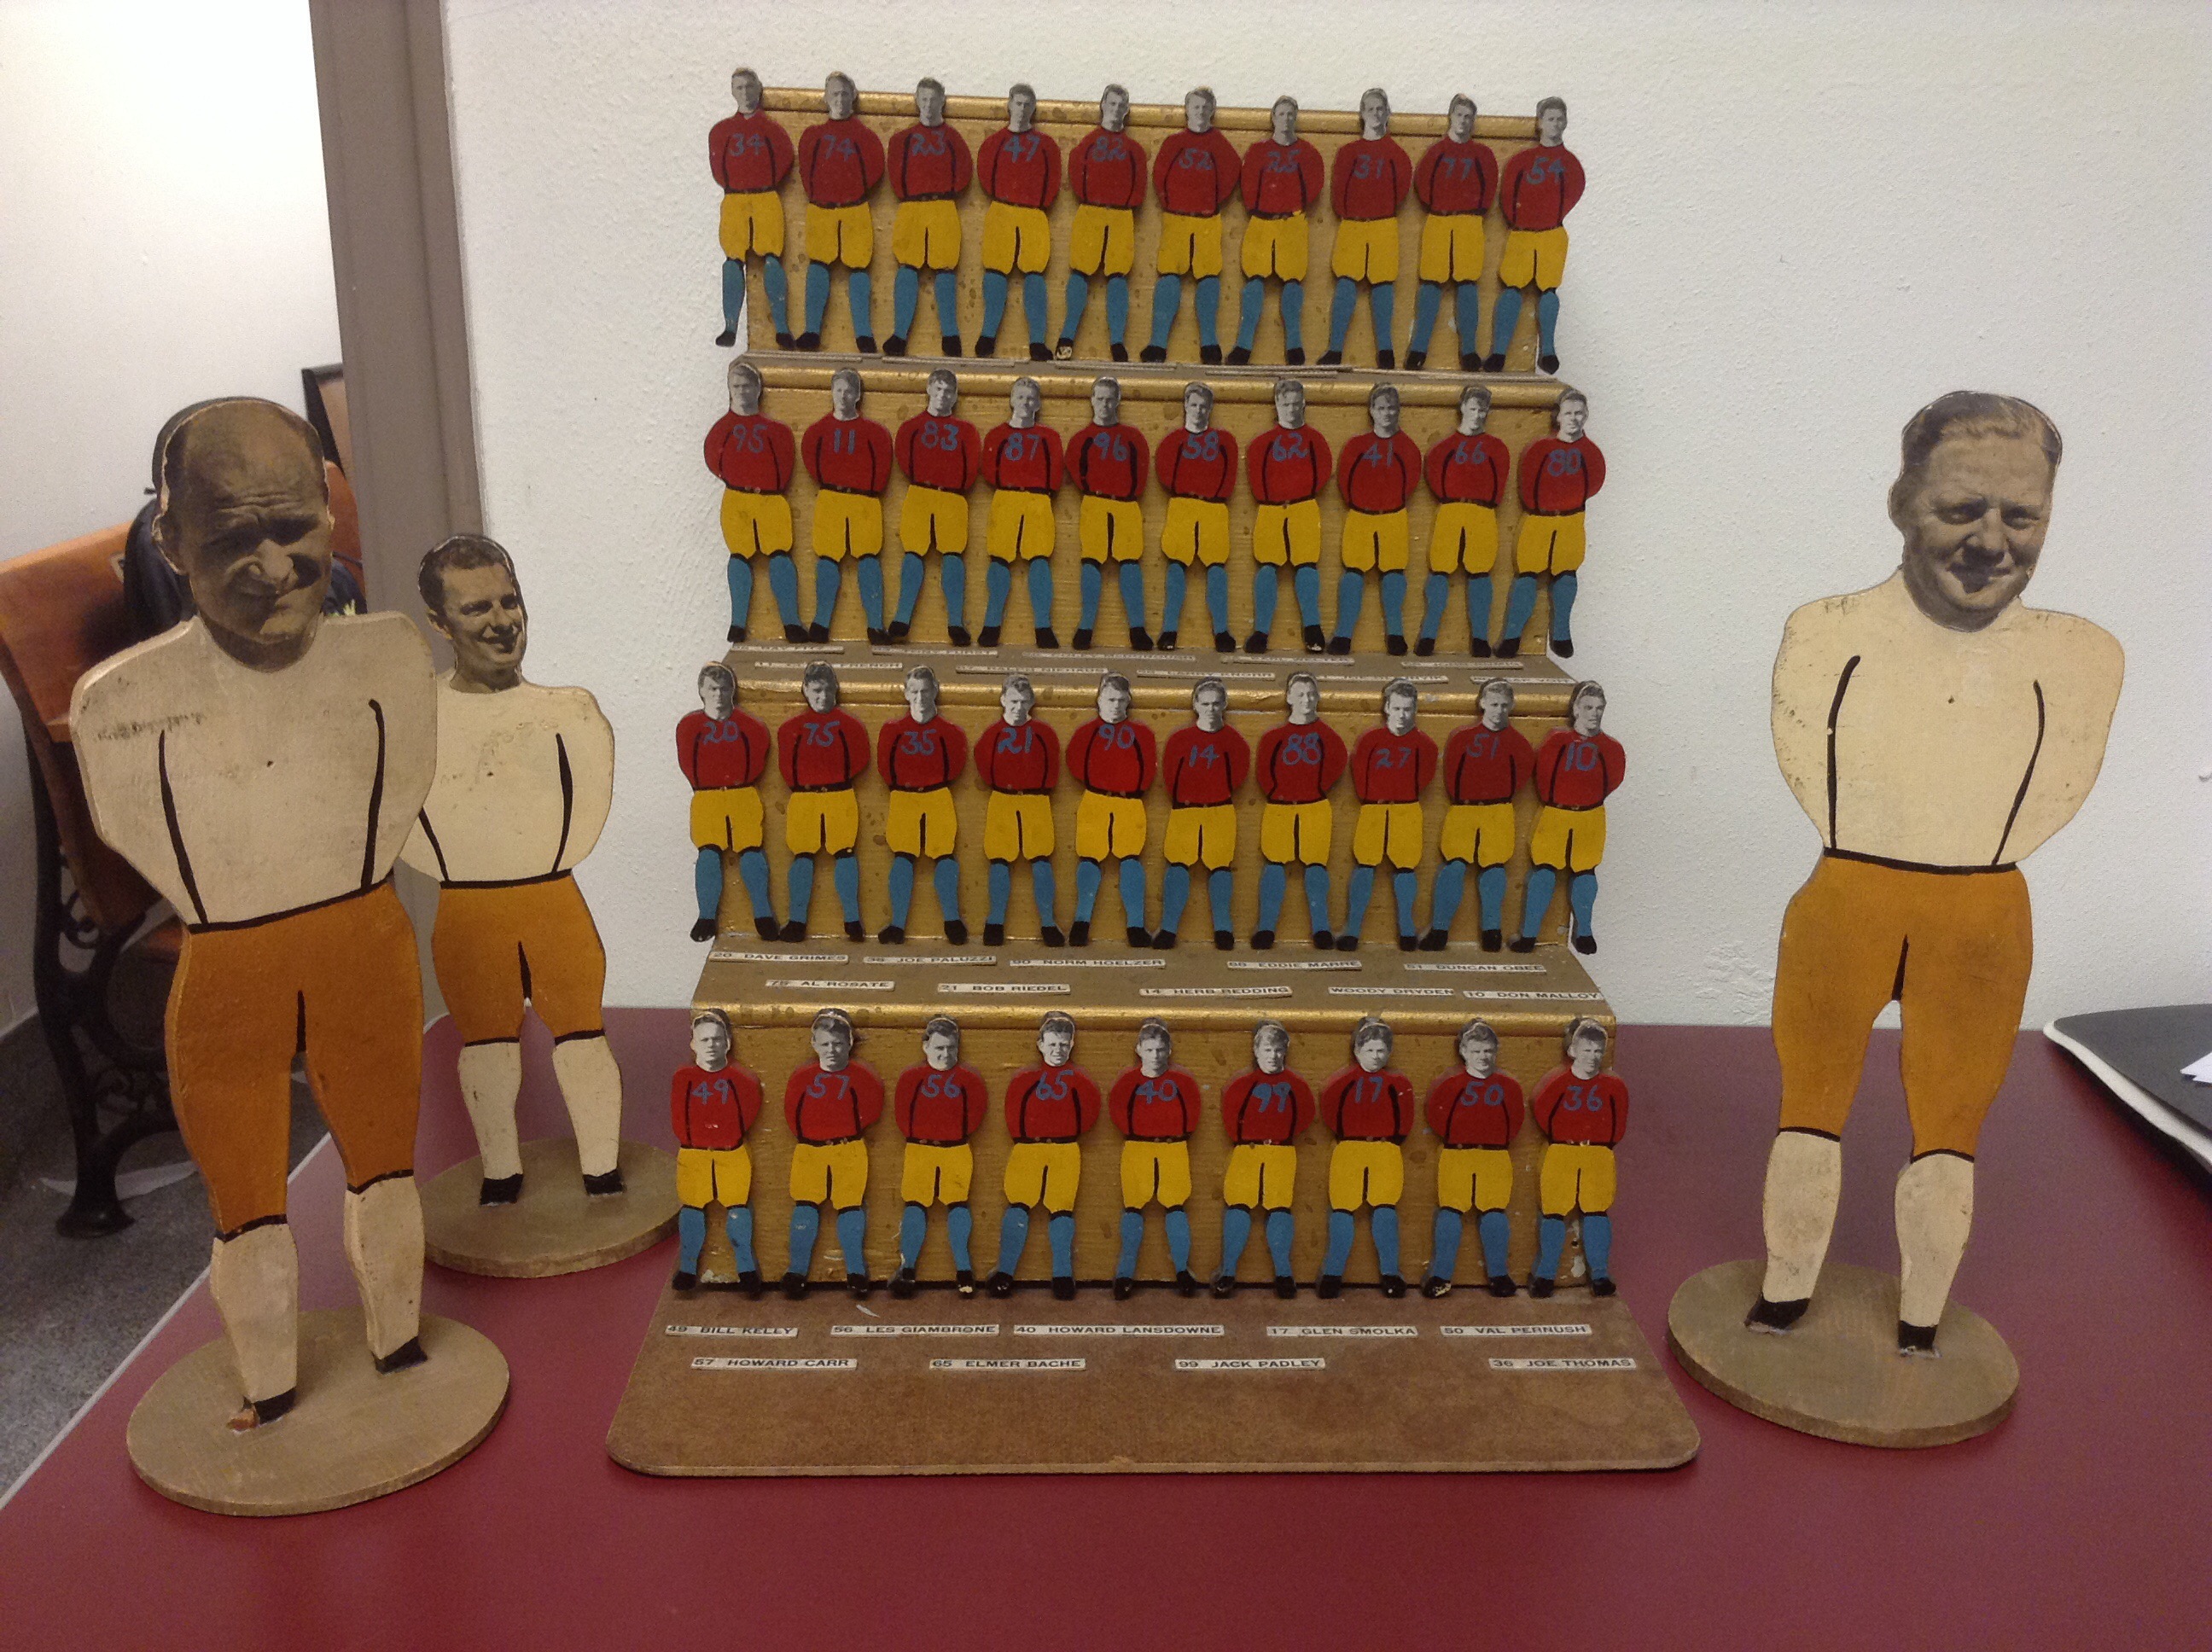 Football team sculpture with faces of athletes pasted onto wooden figures